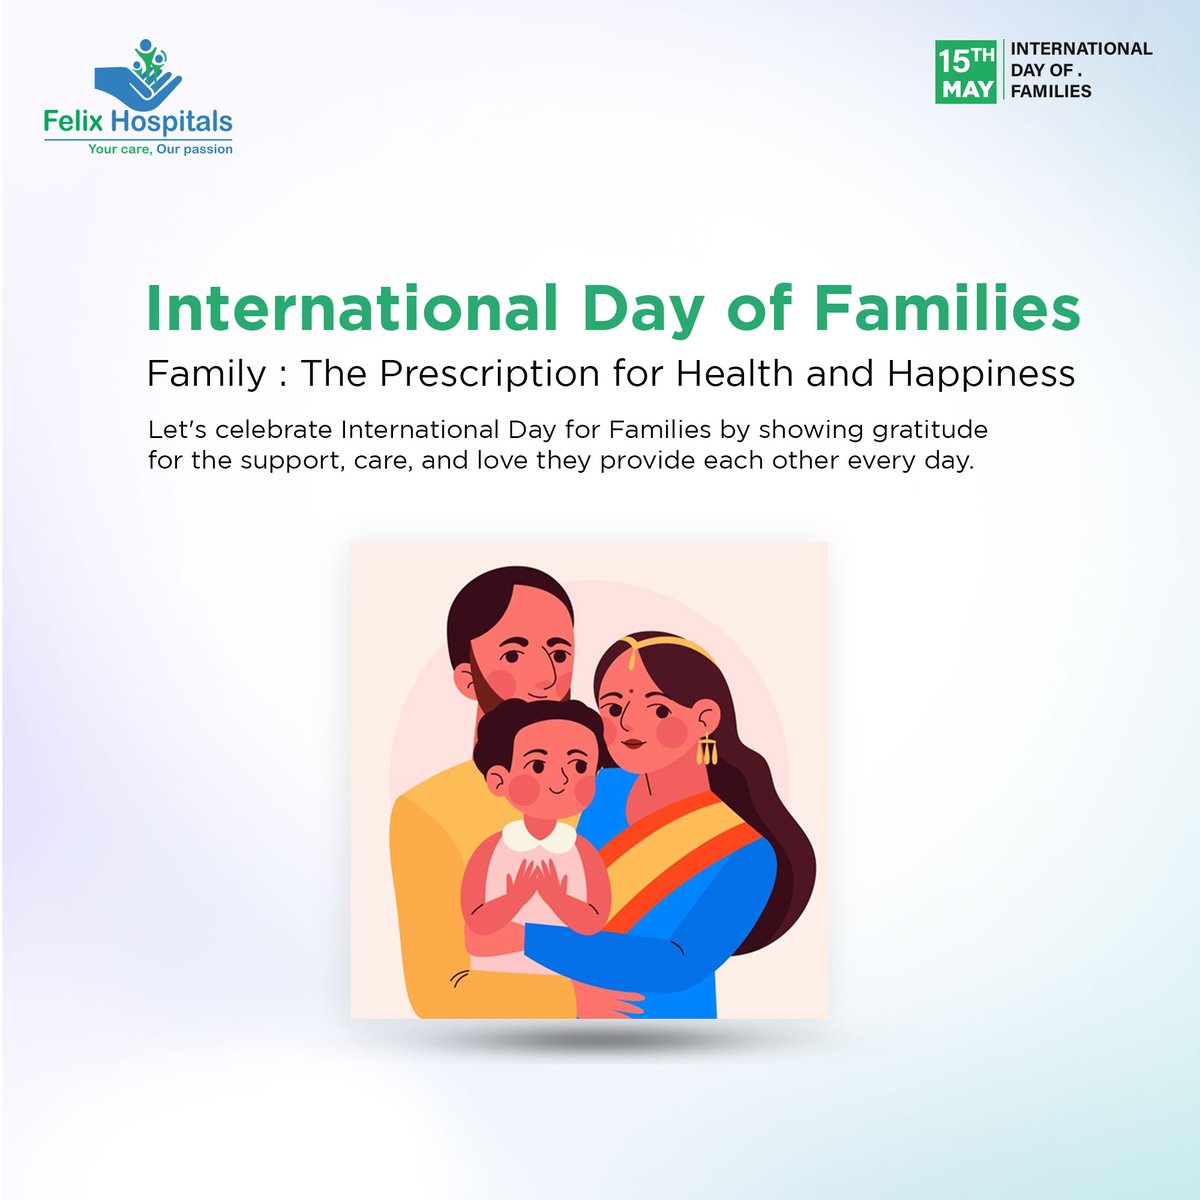 Through ups and downs, family is our anchor. On this International Day for Families, let's be grateful for their love and support. #families #happiness #health #exploremore #besthospitalinnoida #hospitalnear #healthiswealth #HealthCheckup #everyone #felixhospital